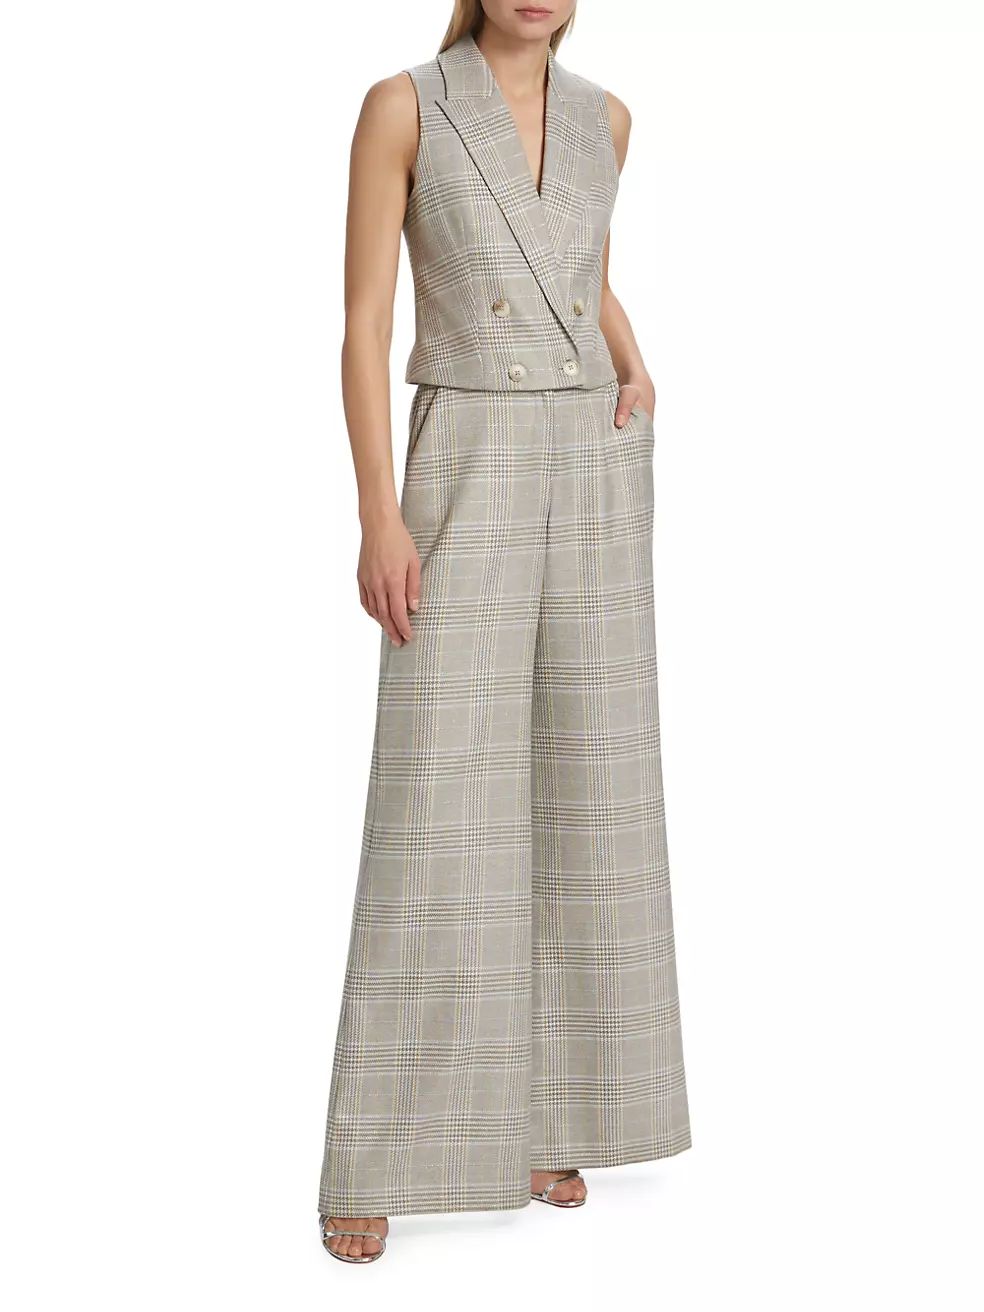 L'AGENCE


Pilar Plaid Wide-Leg Trousers



4.5 out of 5 Customer Rating | Saks Fifth Avenue